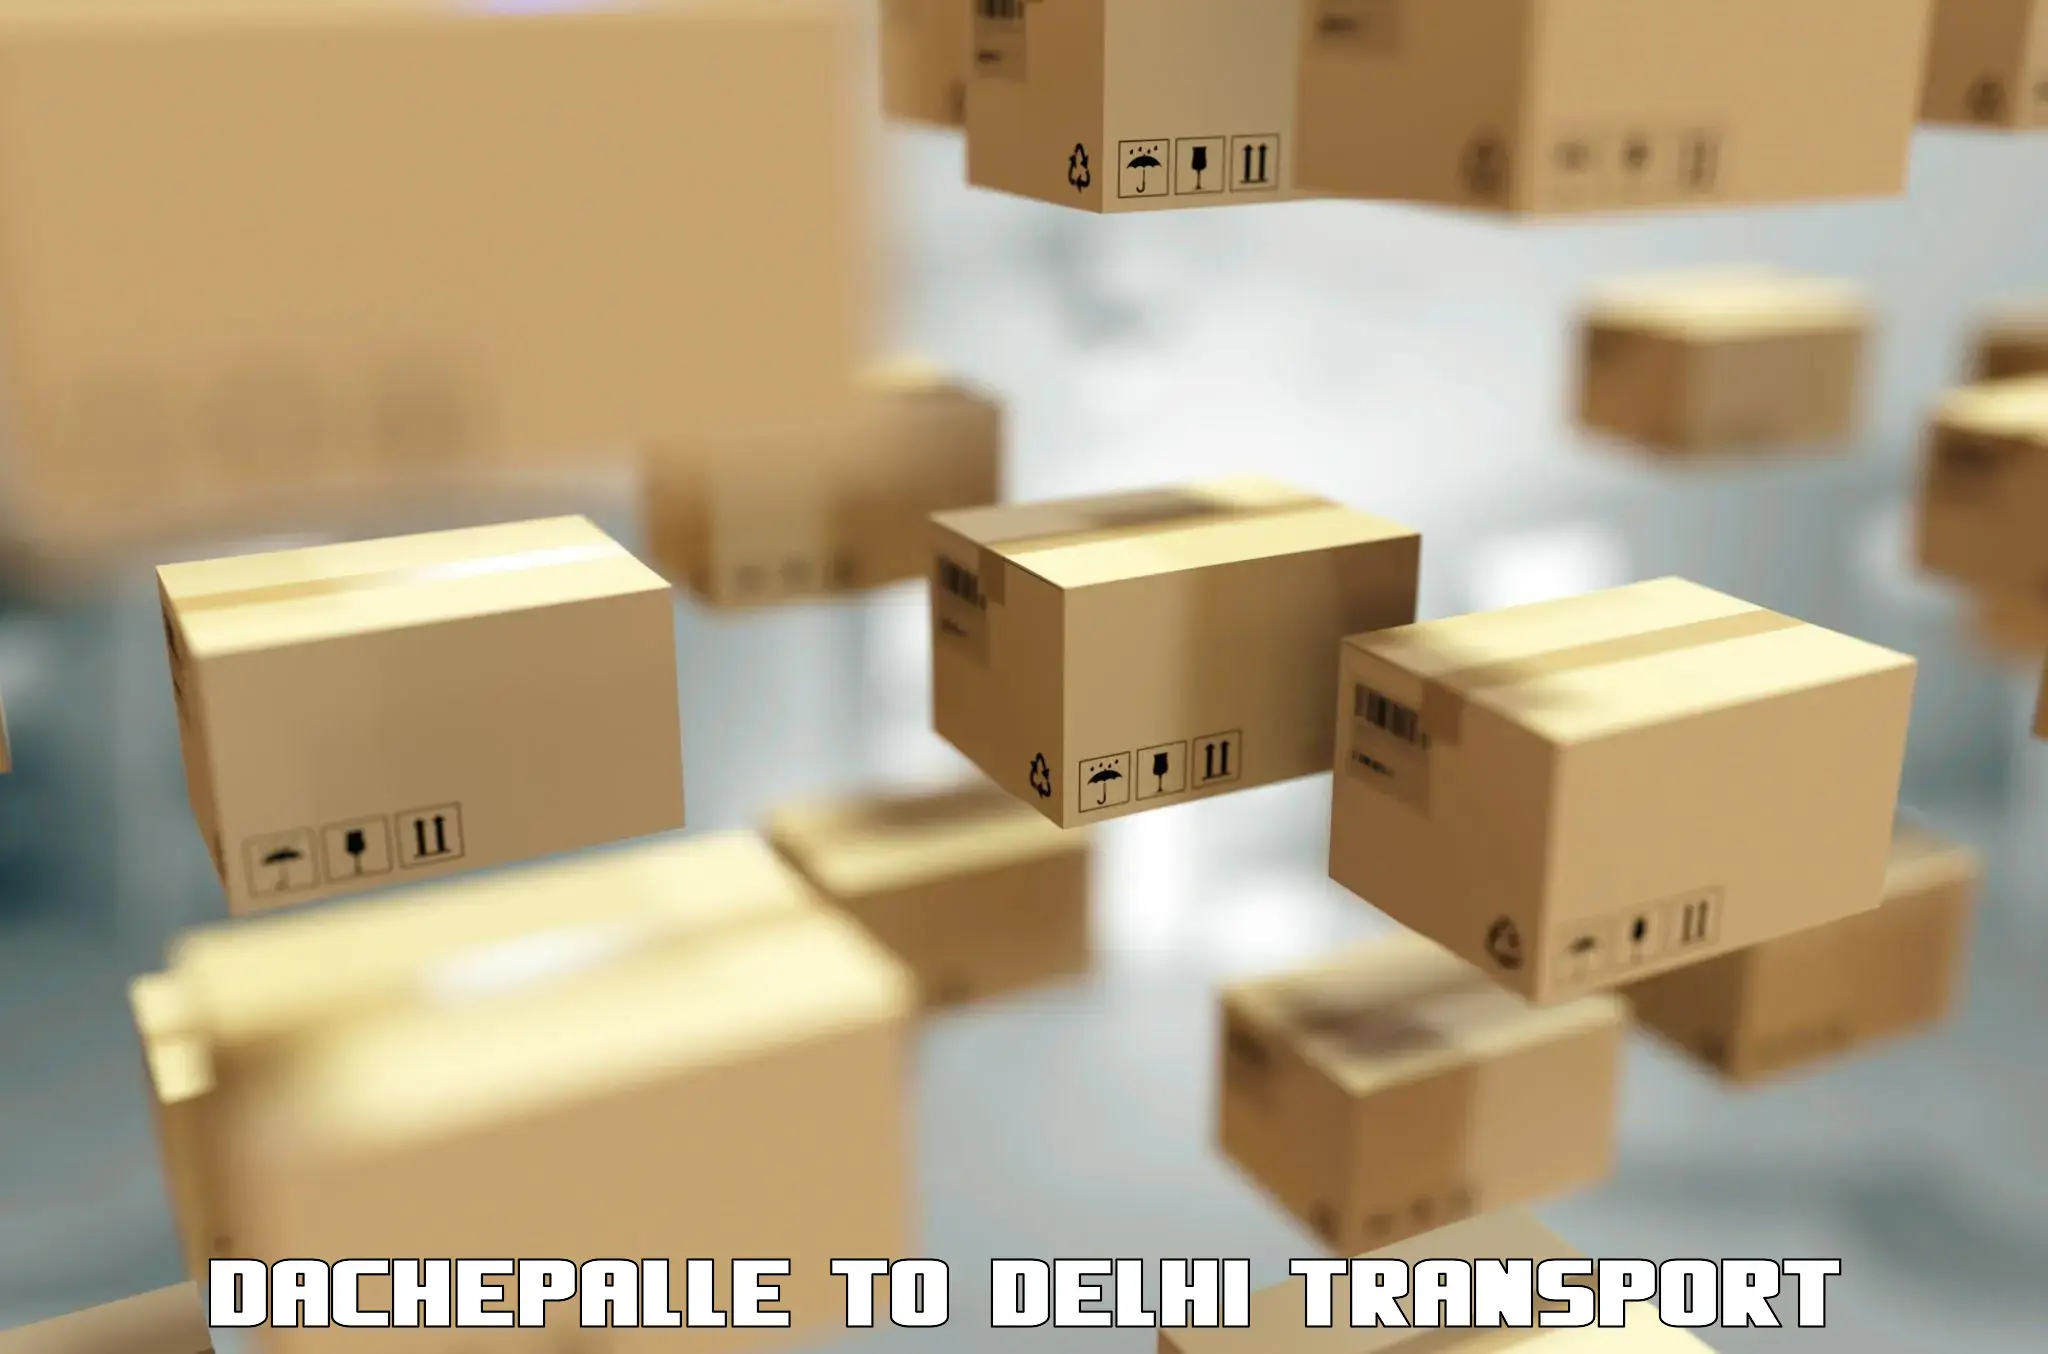 Domestic goods transportation services Dachepalle to Indraprastha